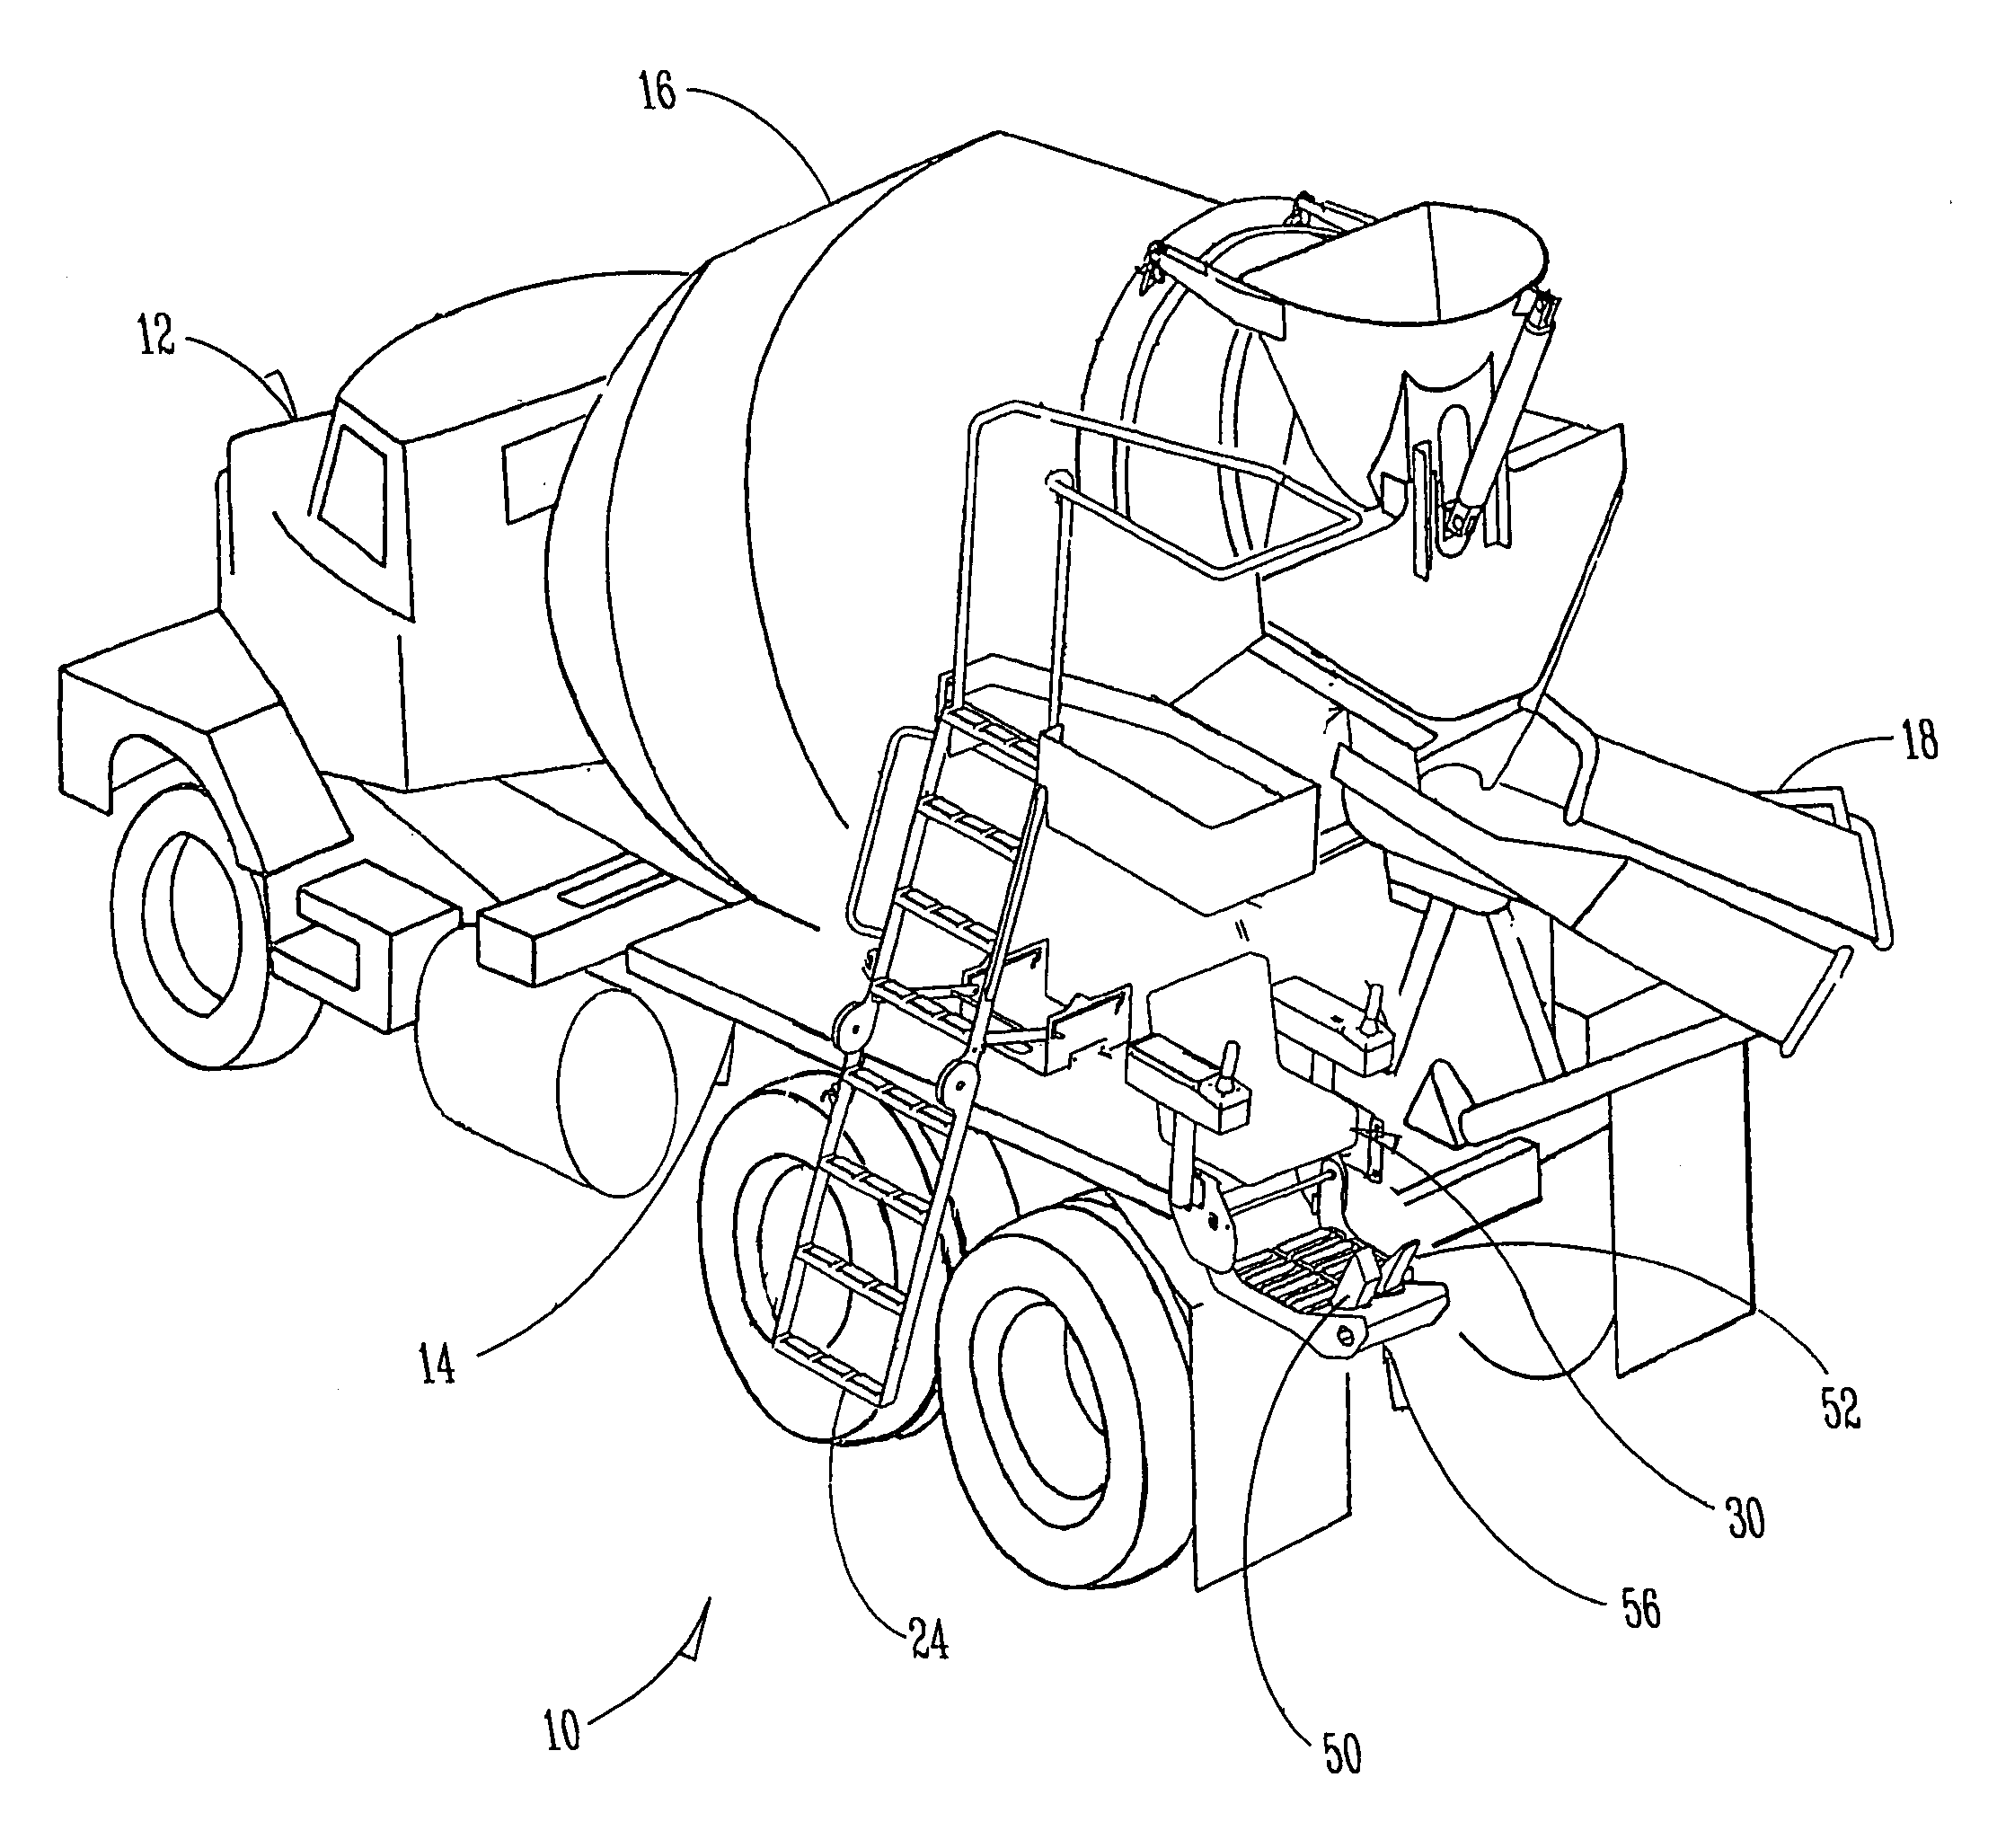 Auxiliary control station for a rear dispensing concrete mixing vehicle